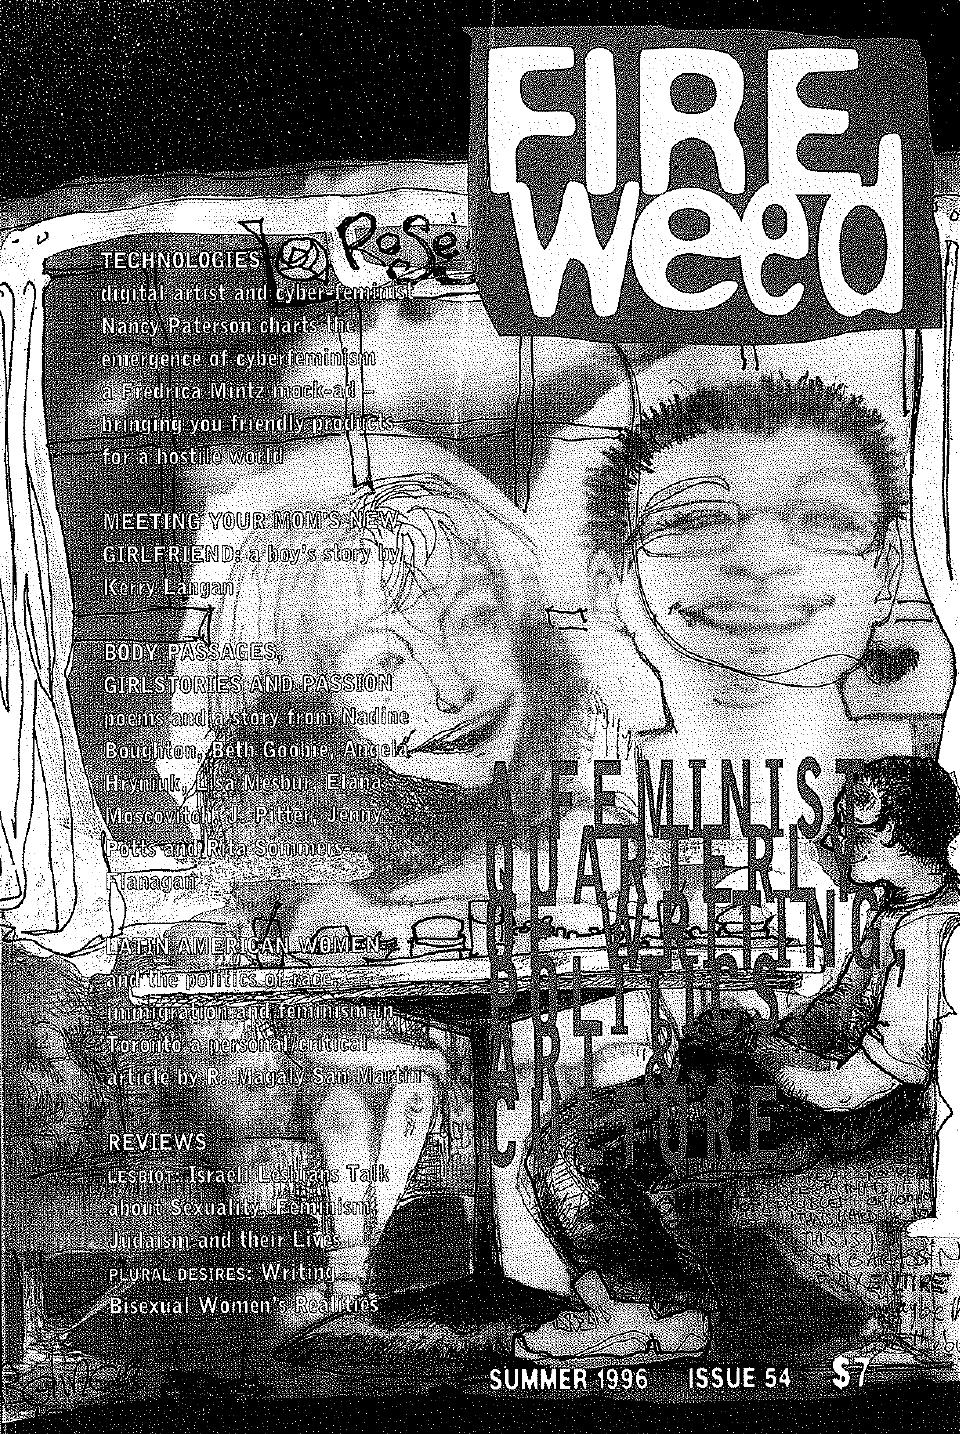 A scan of a black and white poetically chaotic collage. Sketched caricatures sit next to an illustrated man in regular proportions on a diner table. White text flanks left side. "Fireweed" in big text and a square background stamps the top right.